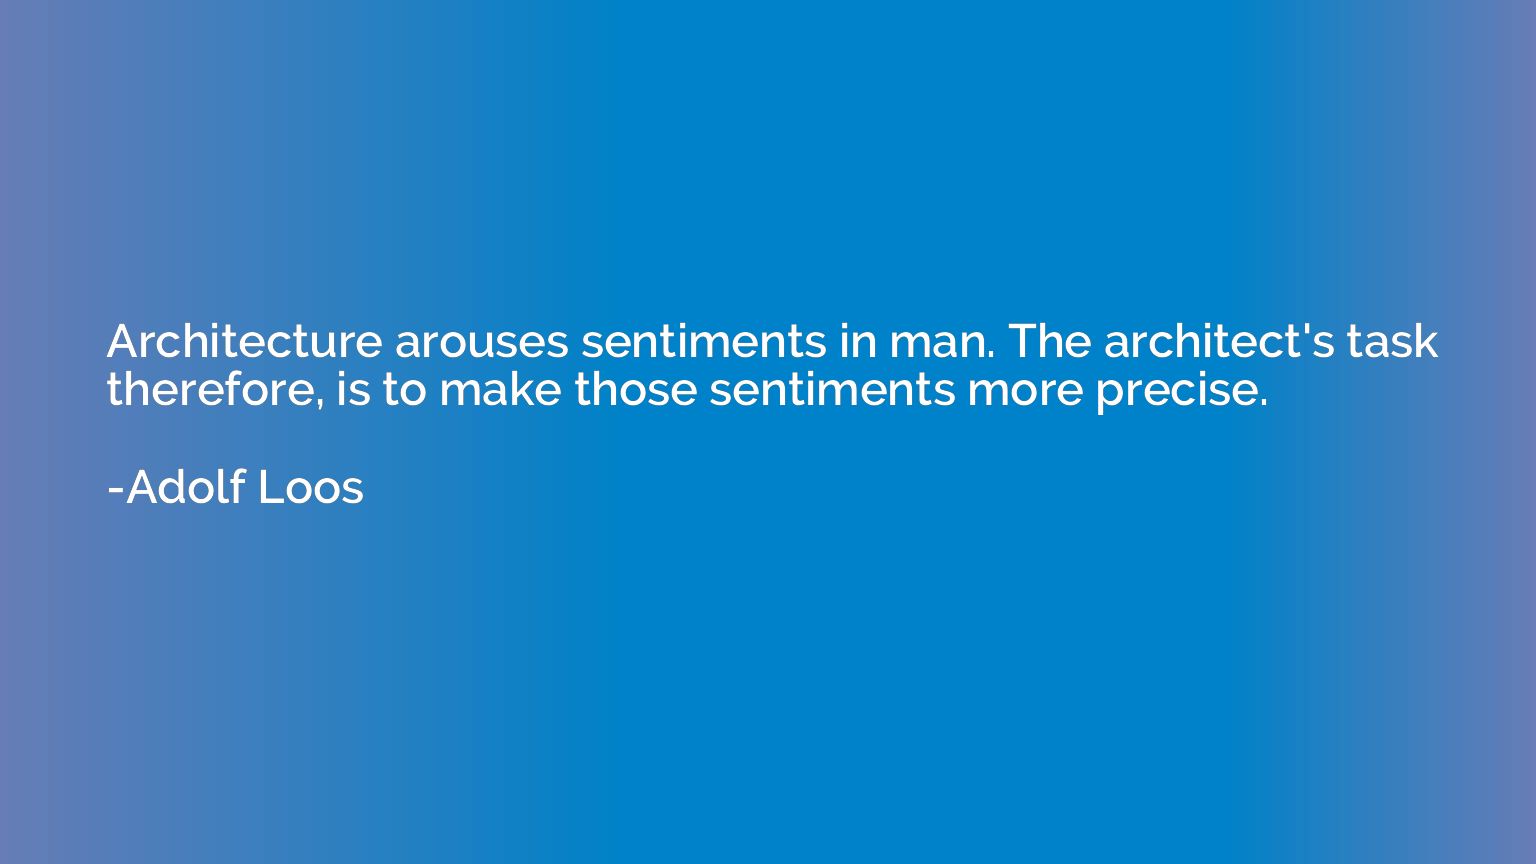 Architecture arouses sentiments in man. The architect's task